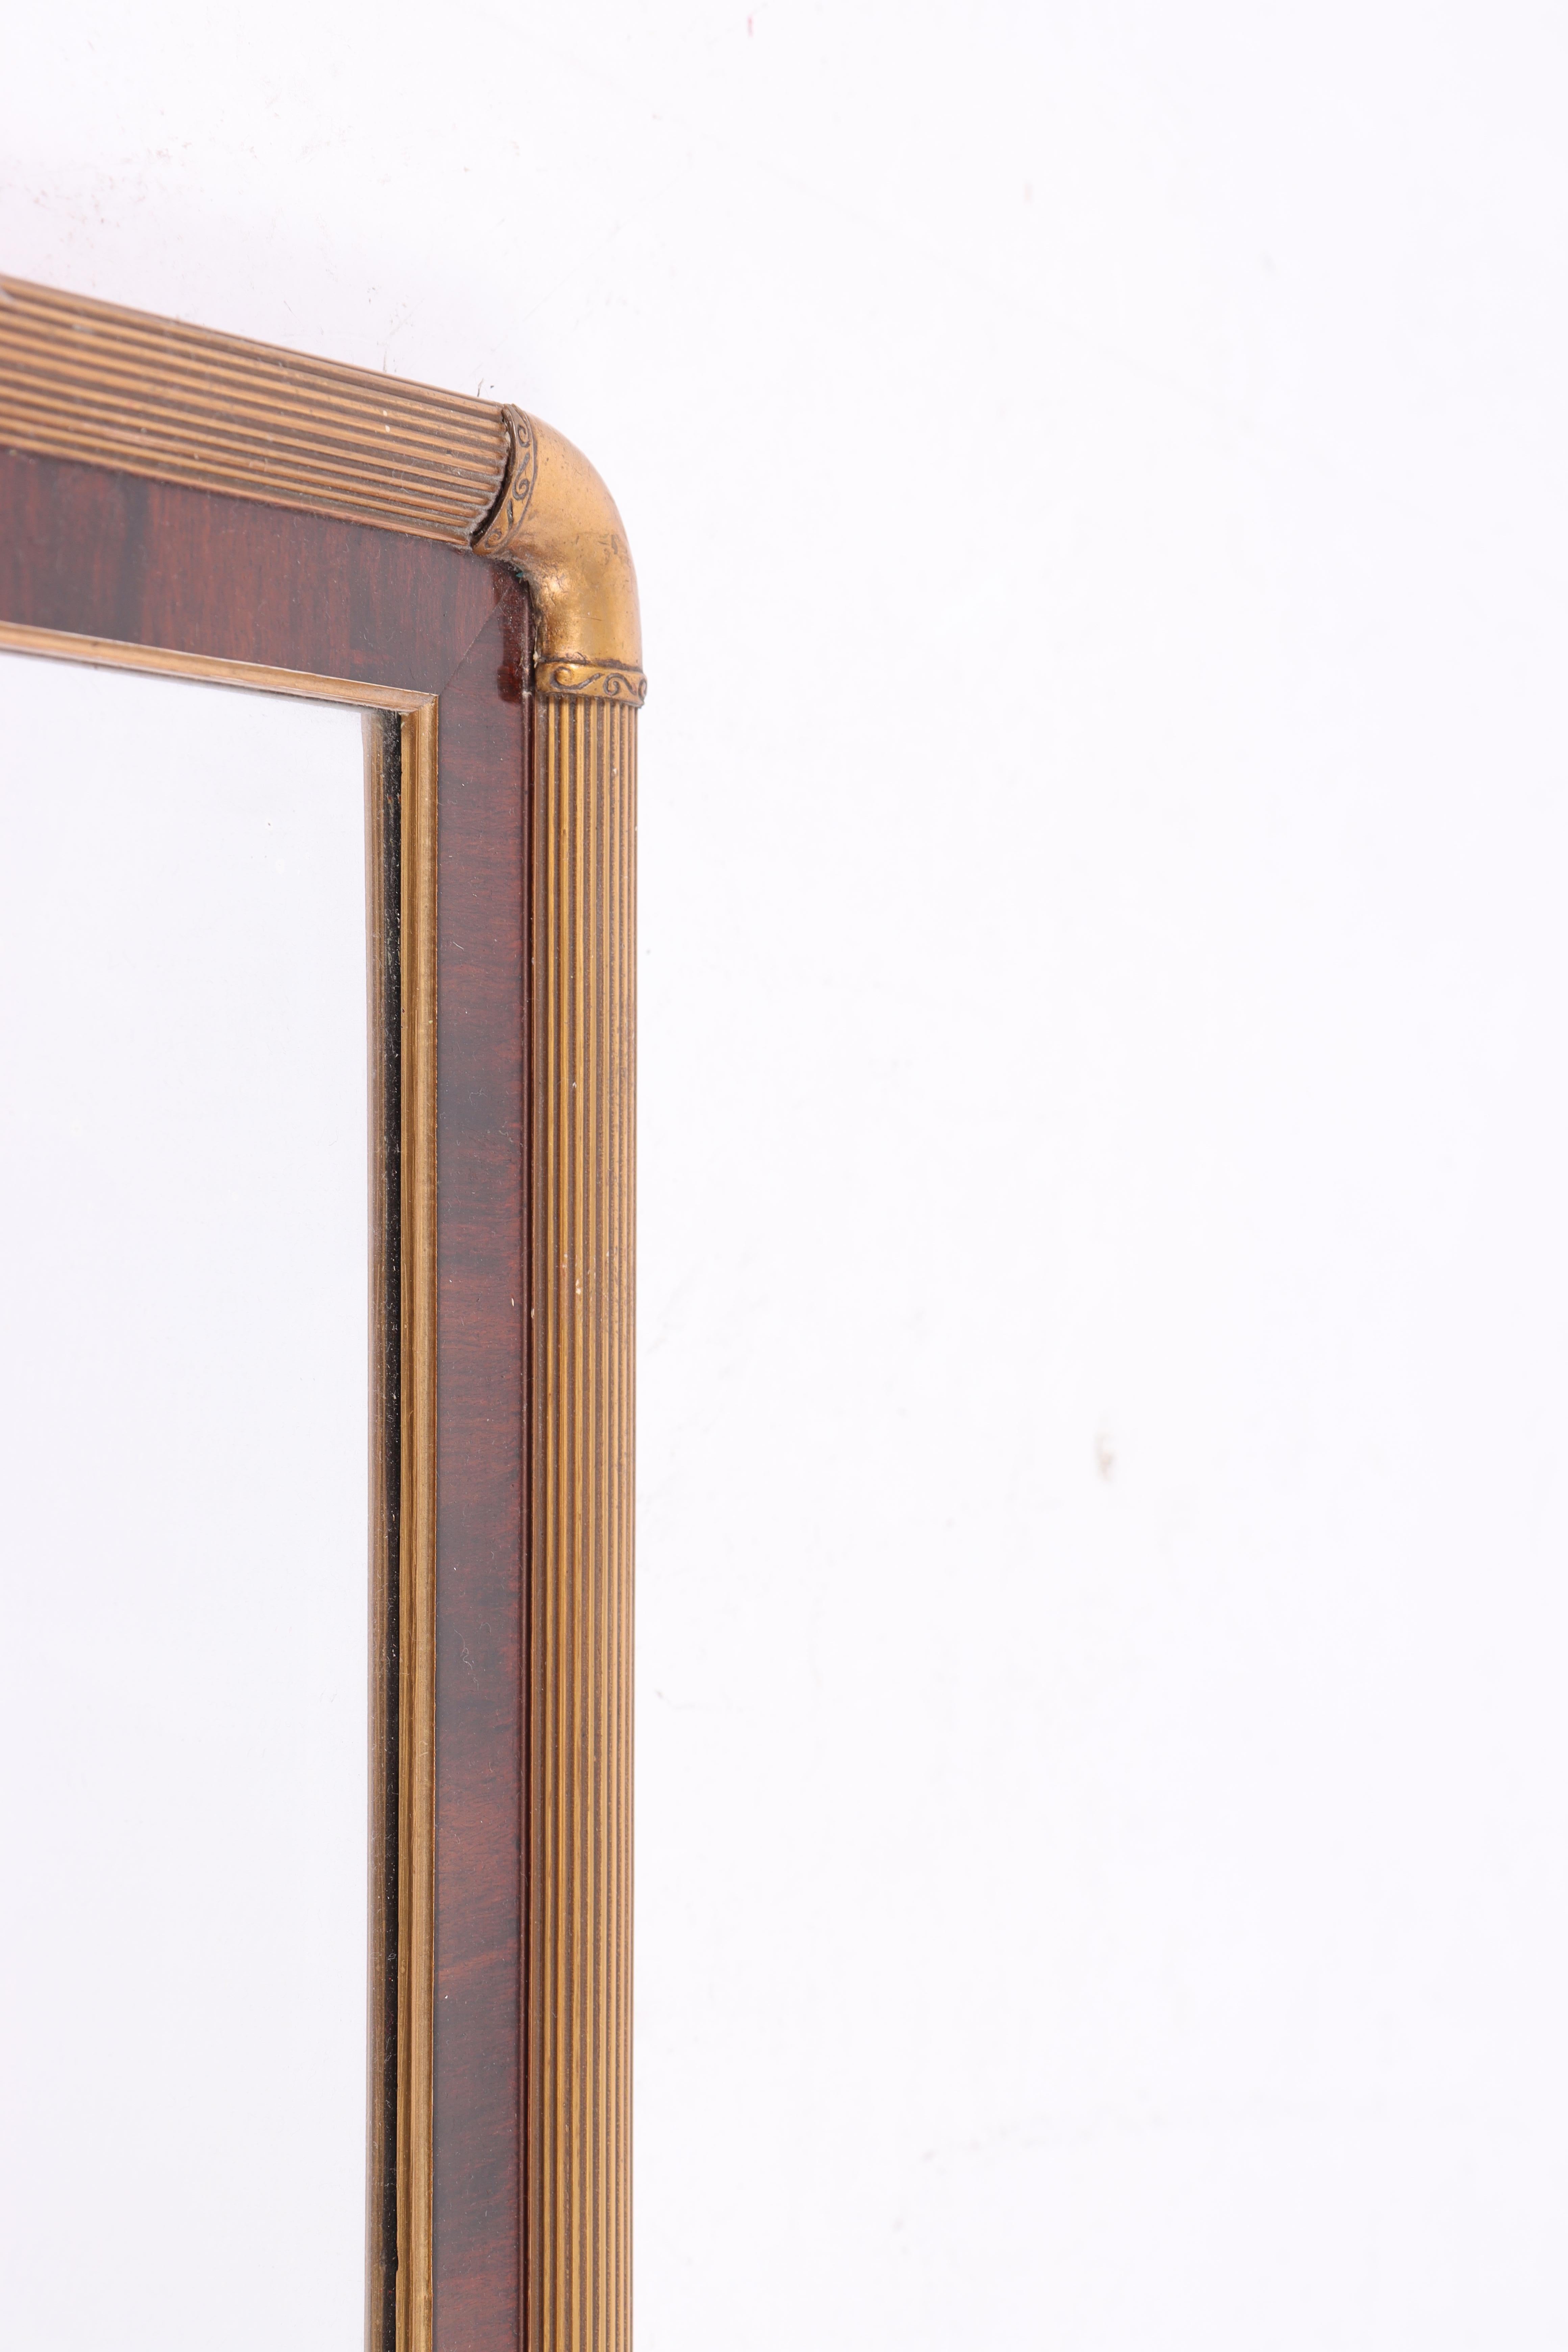 Swedish Midcentury Wall Mirror in Rosewood, Made in Sweden, 1950s For Sale